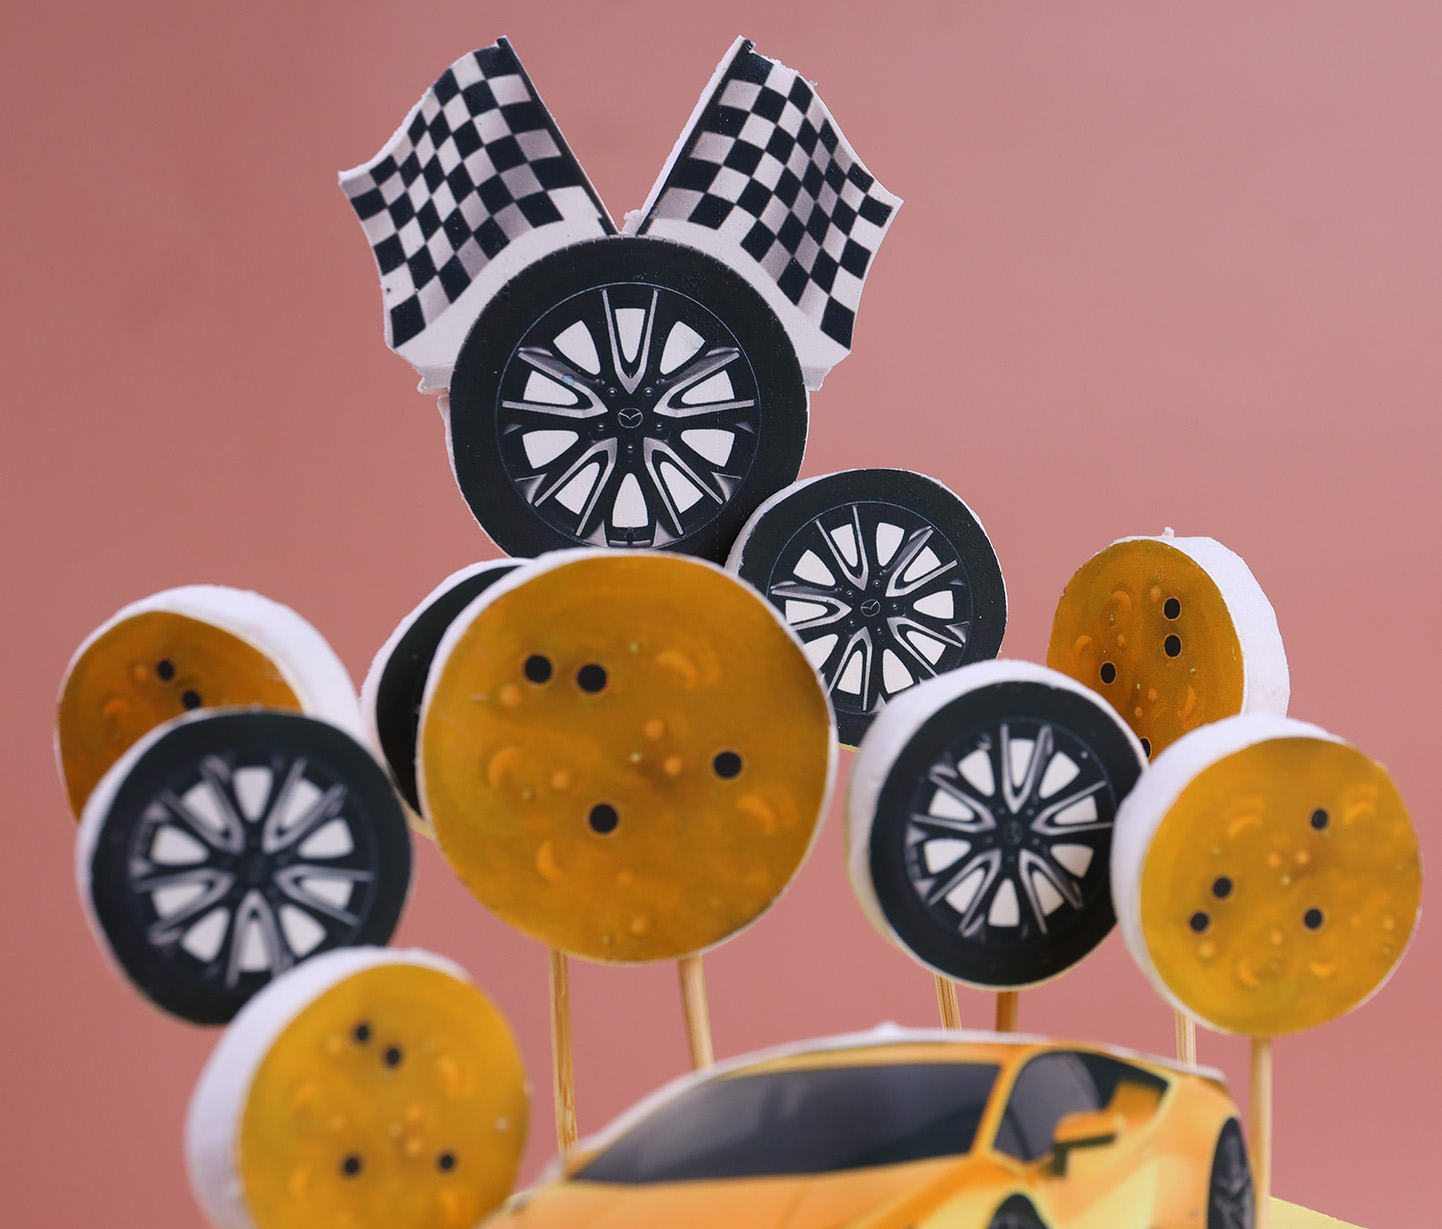 My Sweet Addictions - 8inch lamborghini cake with a toy car as the topper.  | Facebook